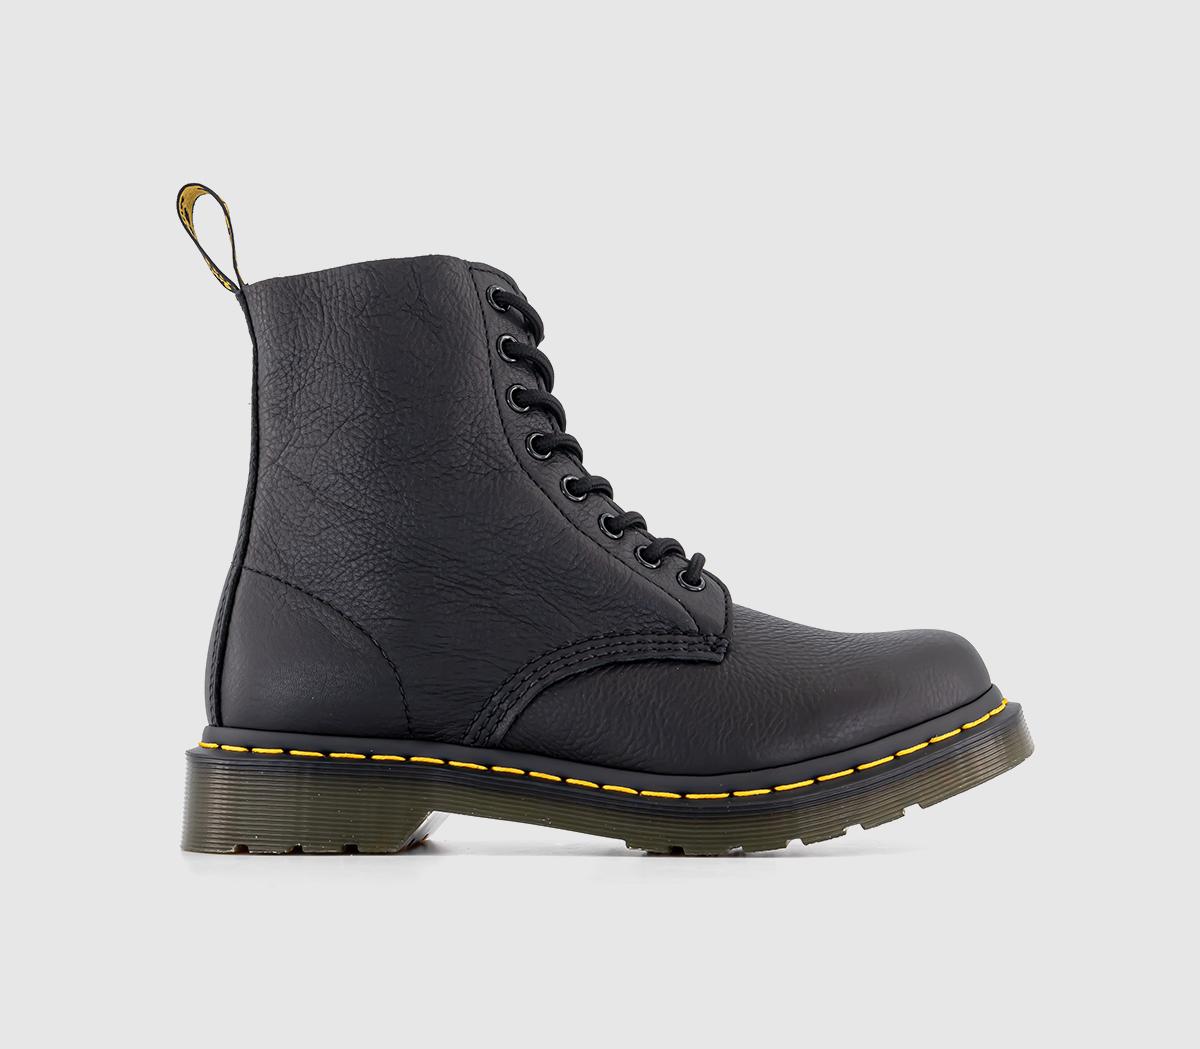 8 Eyelet Lace Up Bt Black Virginia Boots